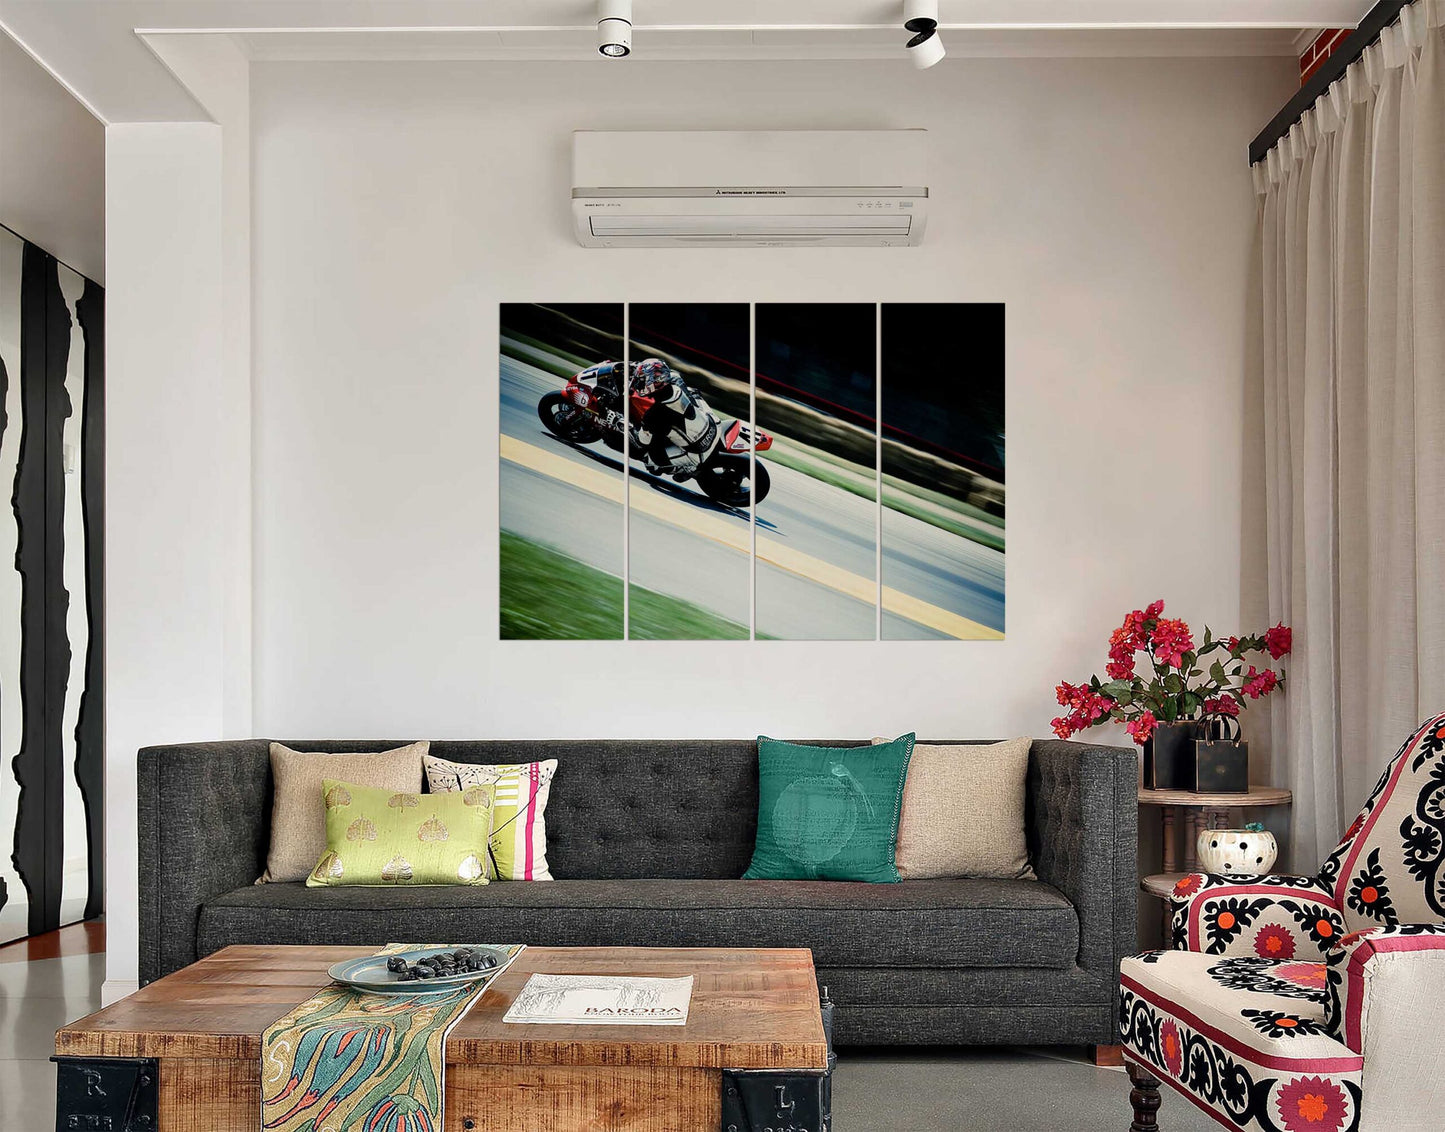 Speedway Motorcycle Race Panning Wall Wall Painting